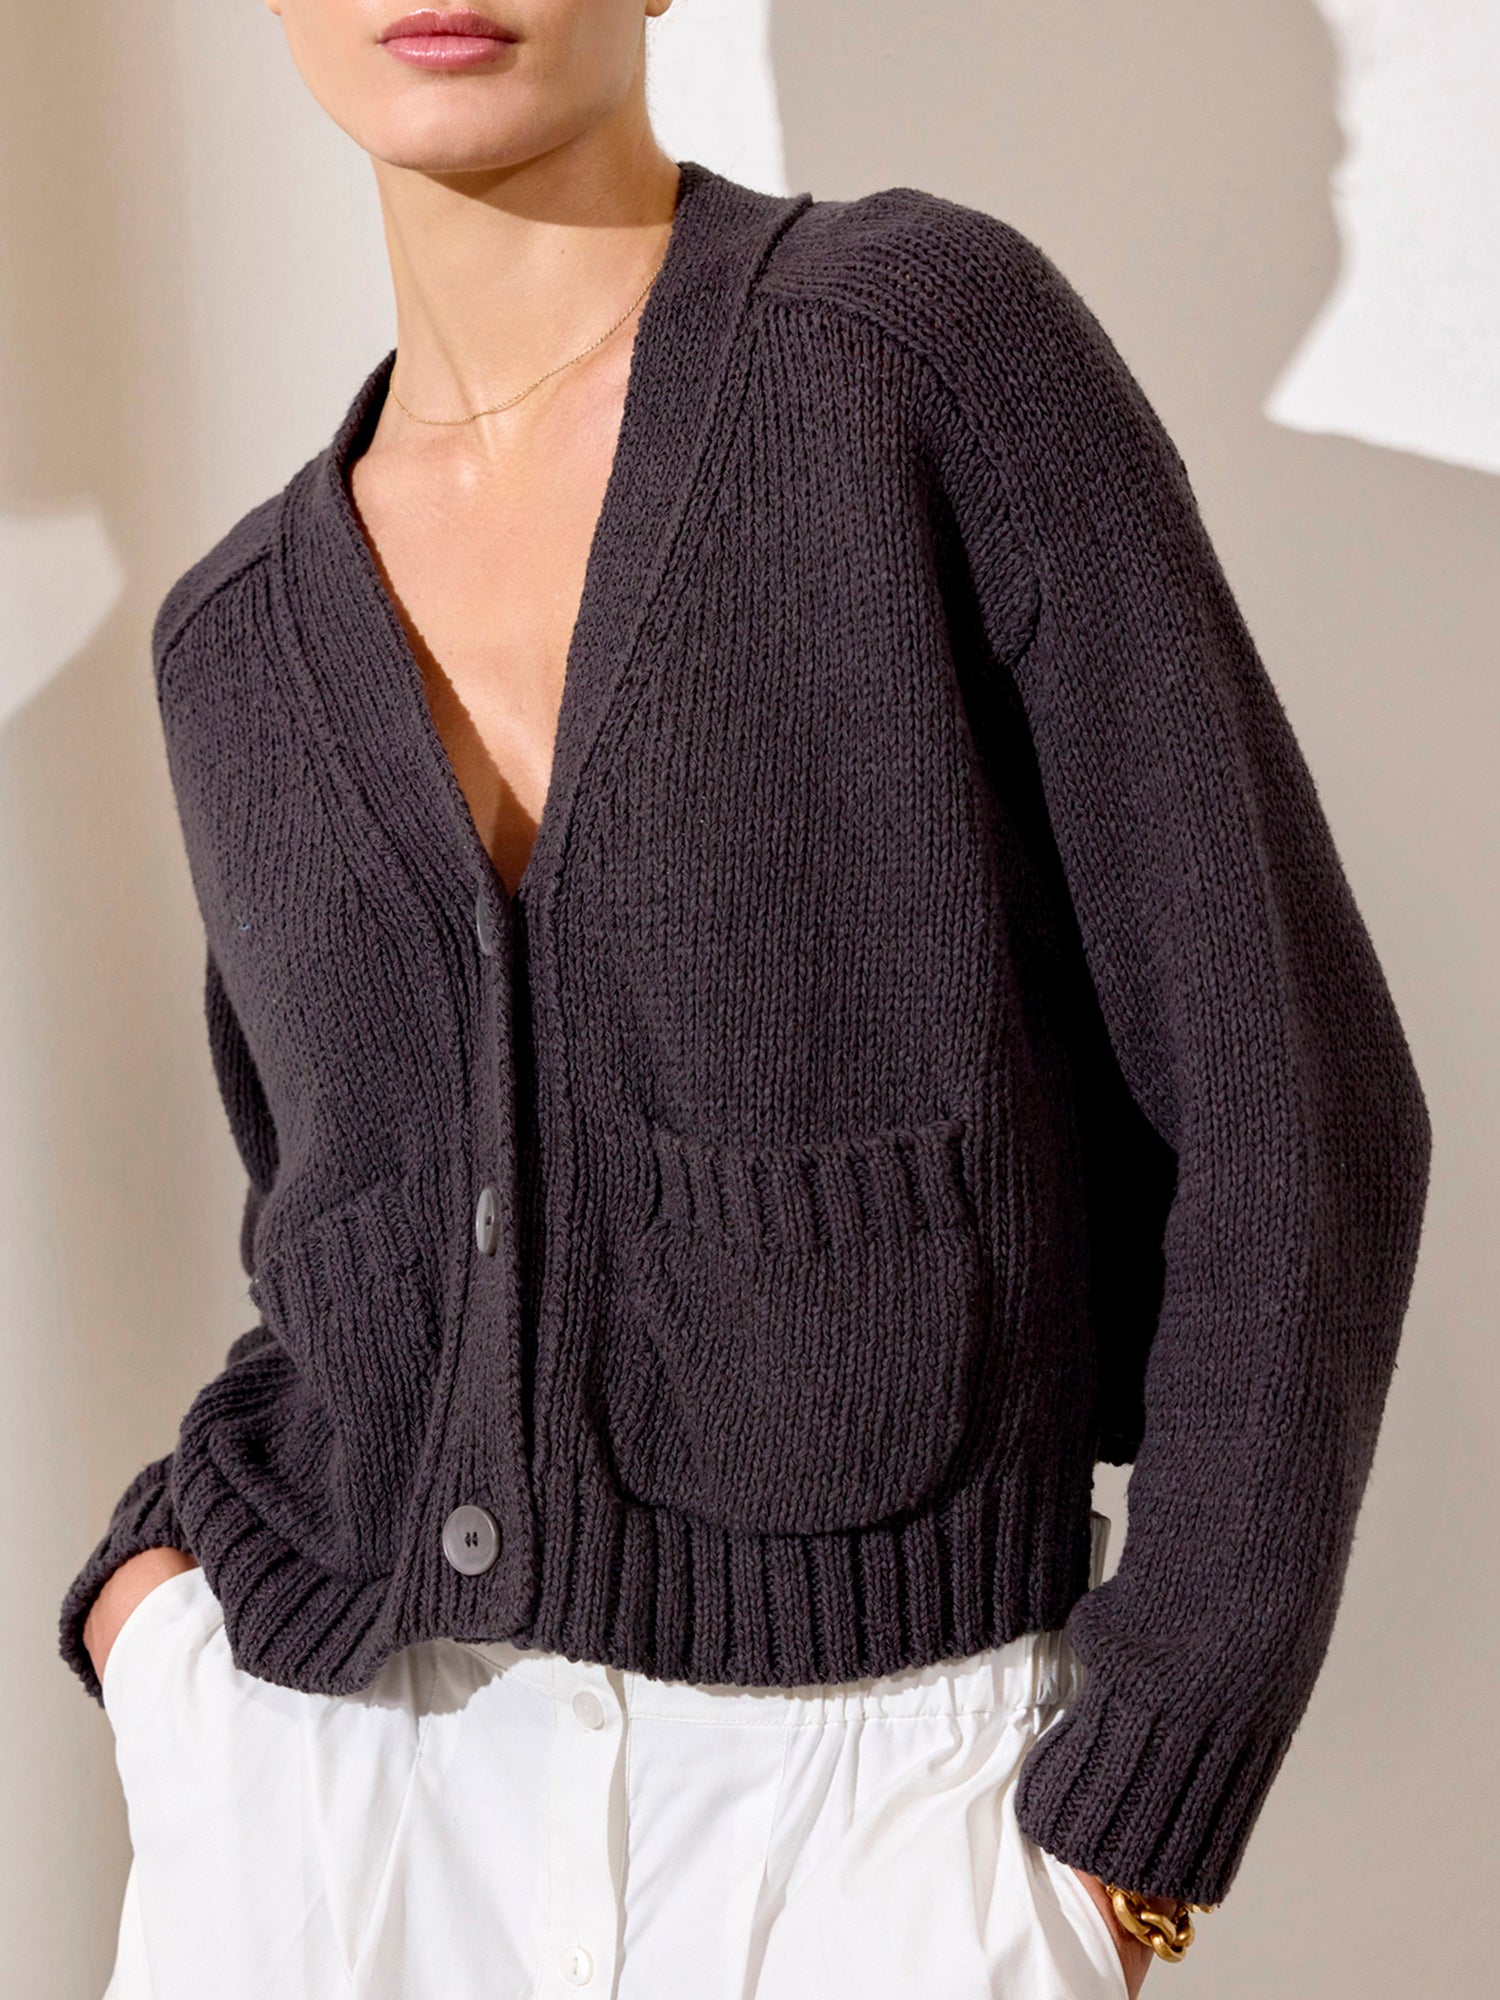 Cropped black linen cotton cardigan sweater front view